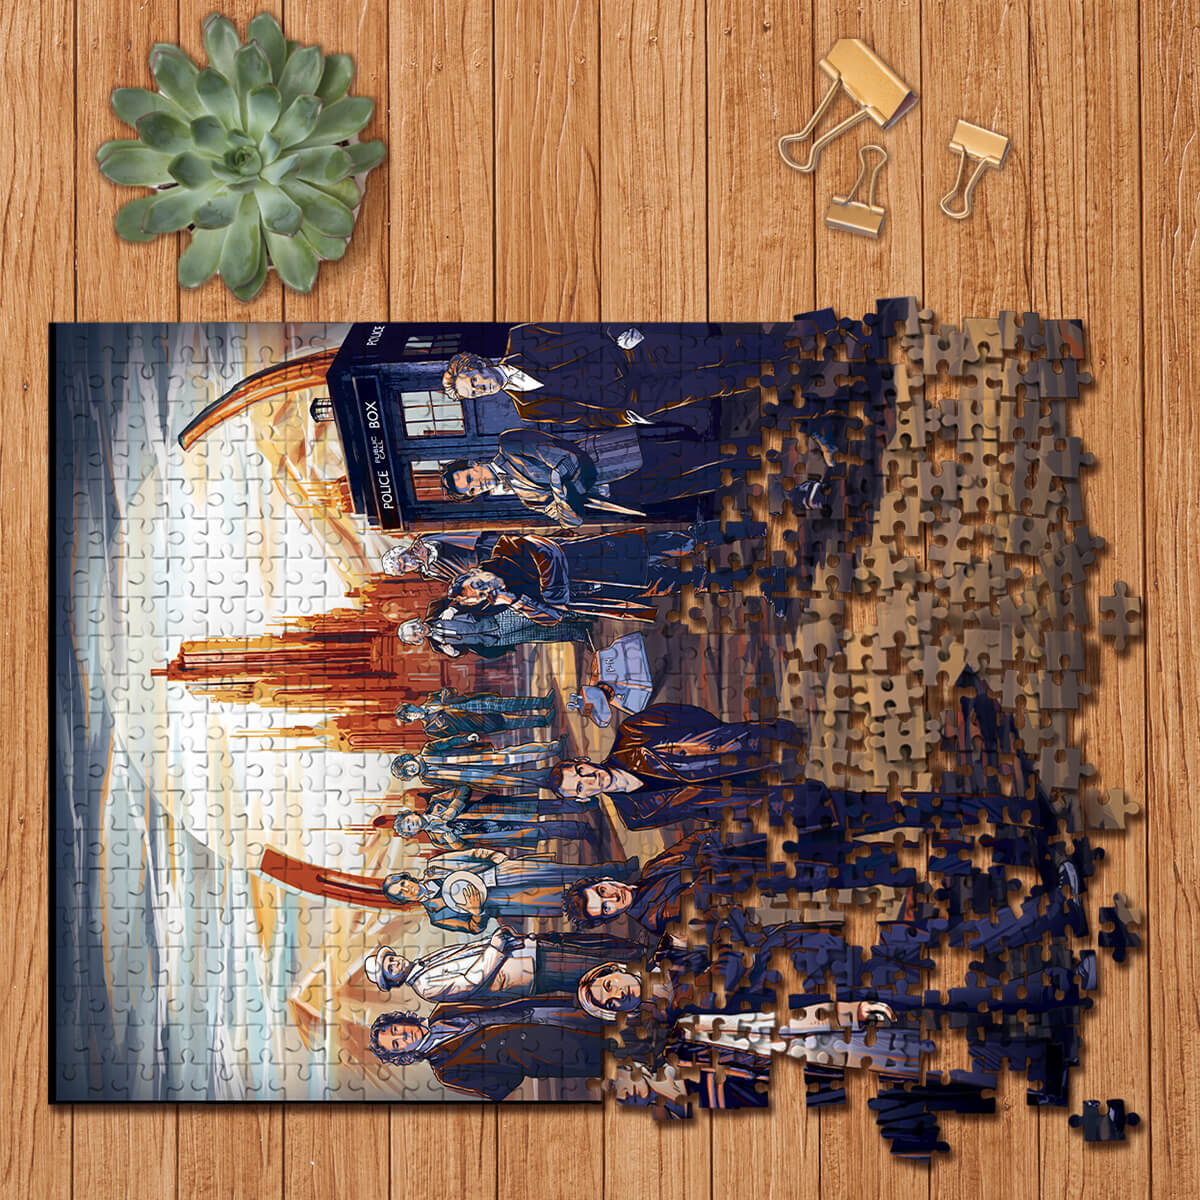 The Doctors Collection Wooden Jigsaw Puzzles